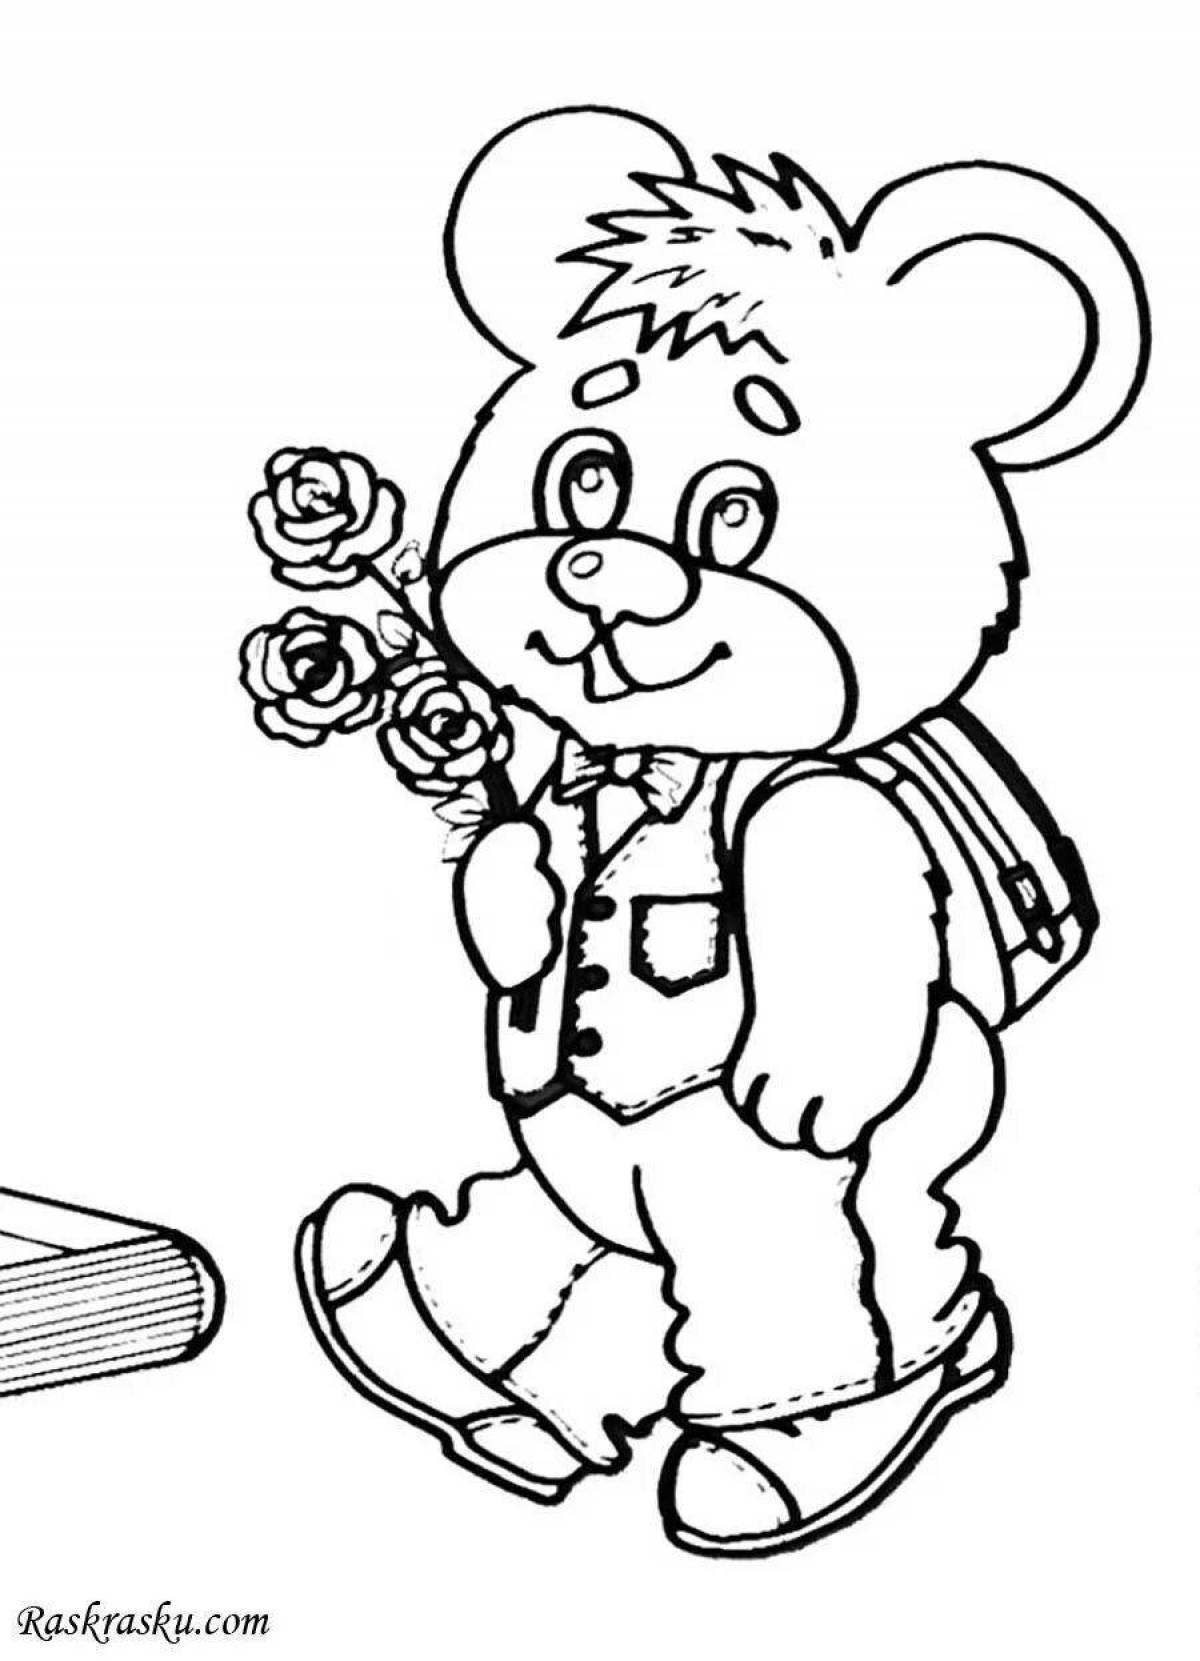 Crazy coloring book for first graders